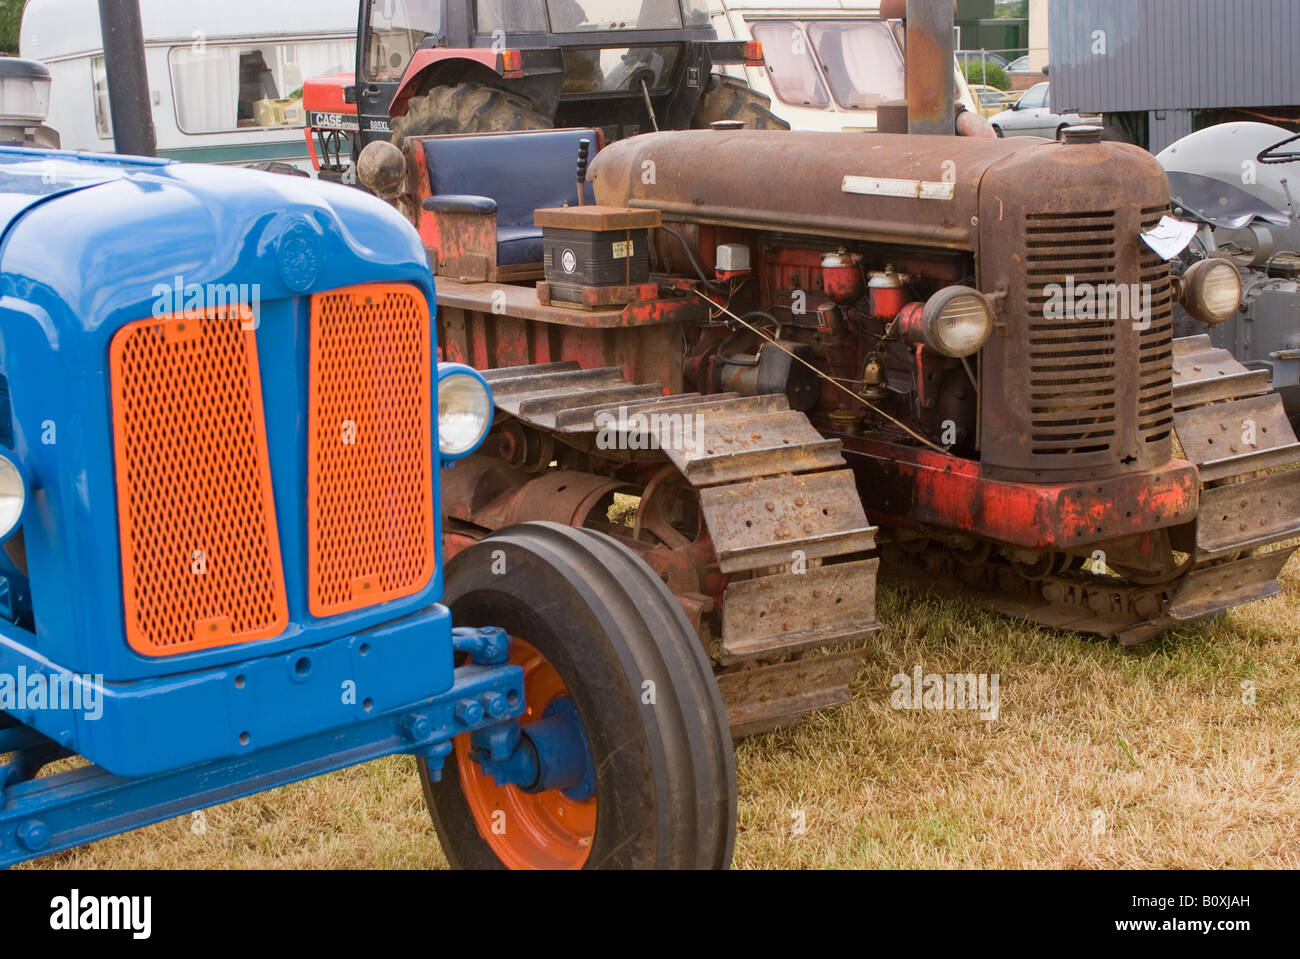 Old Rusty David Brown Caterpillar Tractor with Tractor Radiator at Smallwood Vintage Rally Cheshire England United Kingdom UK Stock Photo